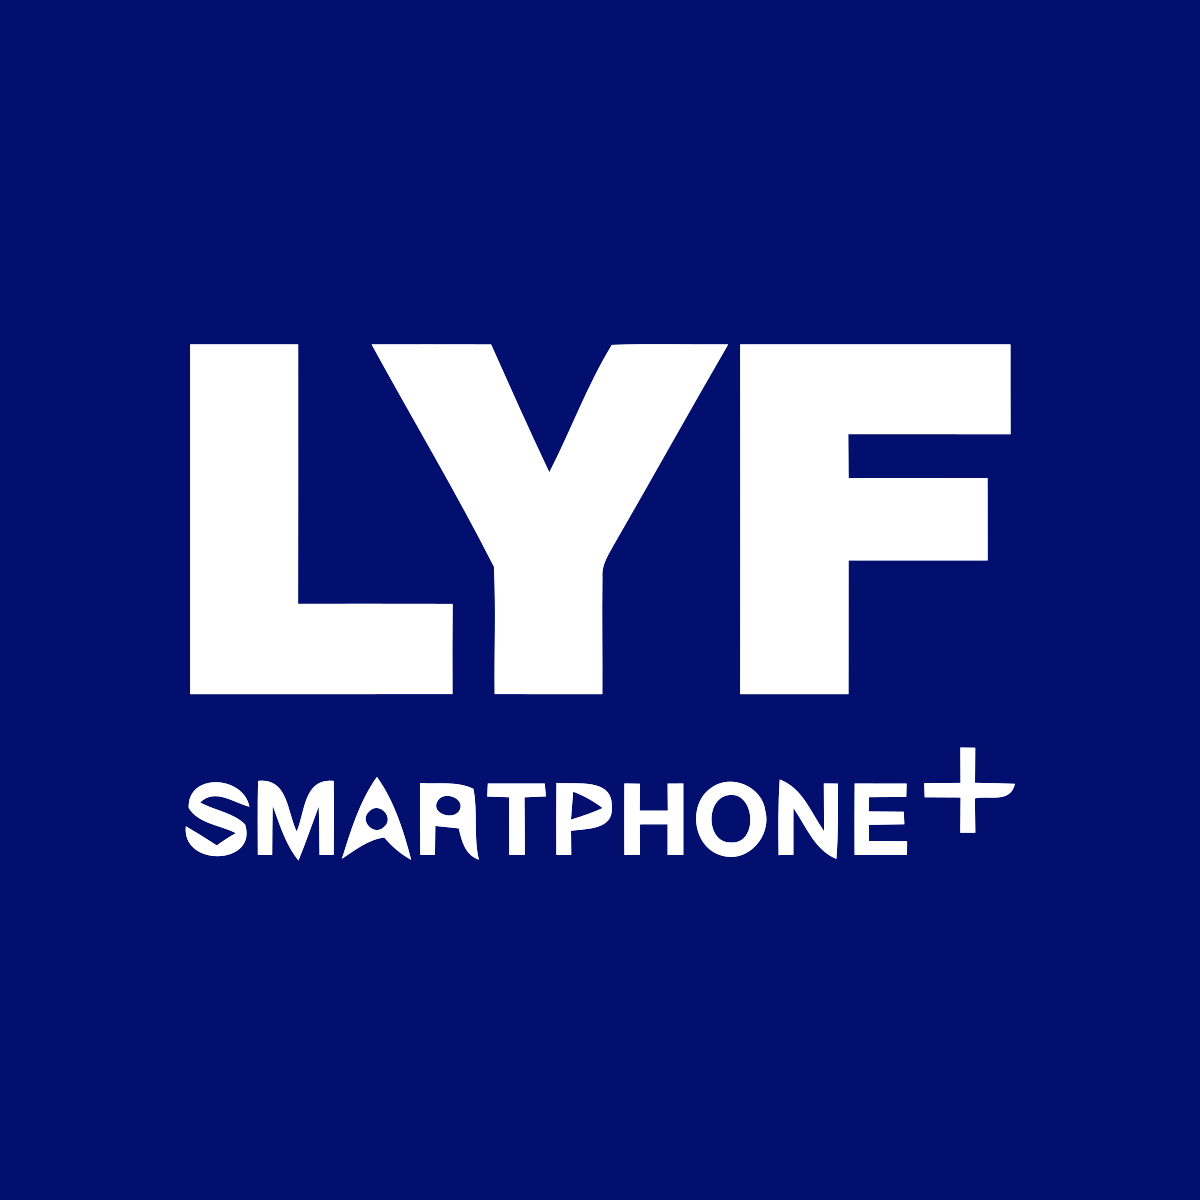 Indian phone brands - Reliance Jio Lyf Mobiles